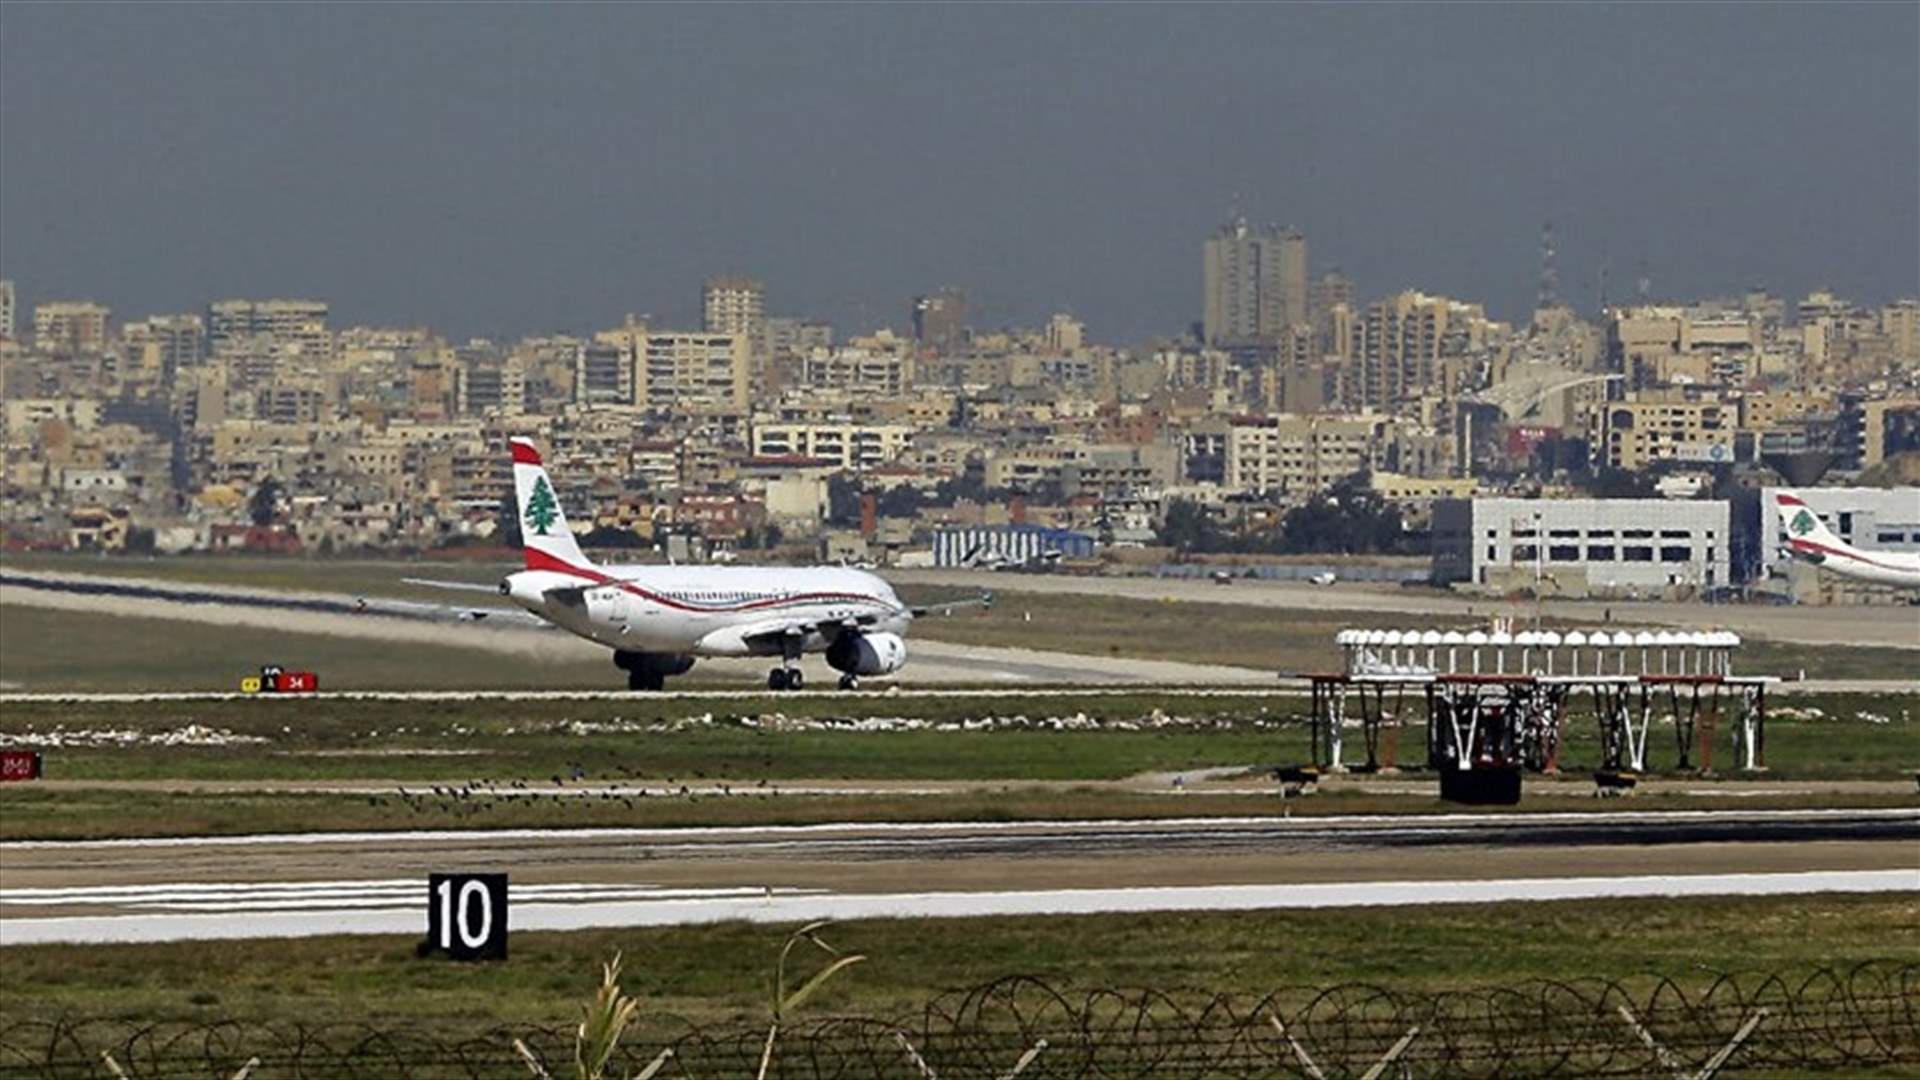 Five MEA flights to arrive today at Beirut airport